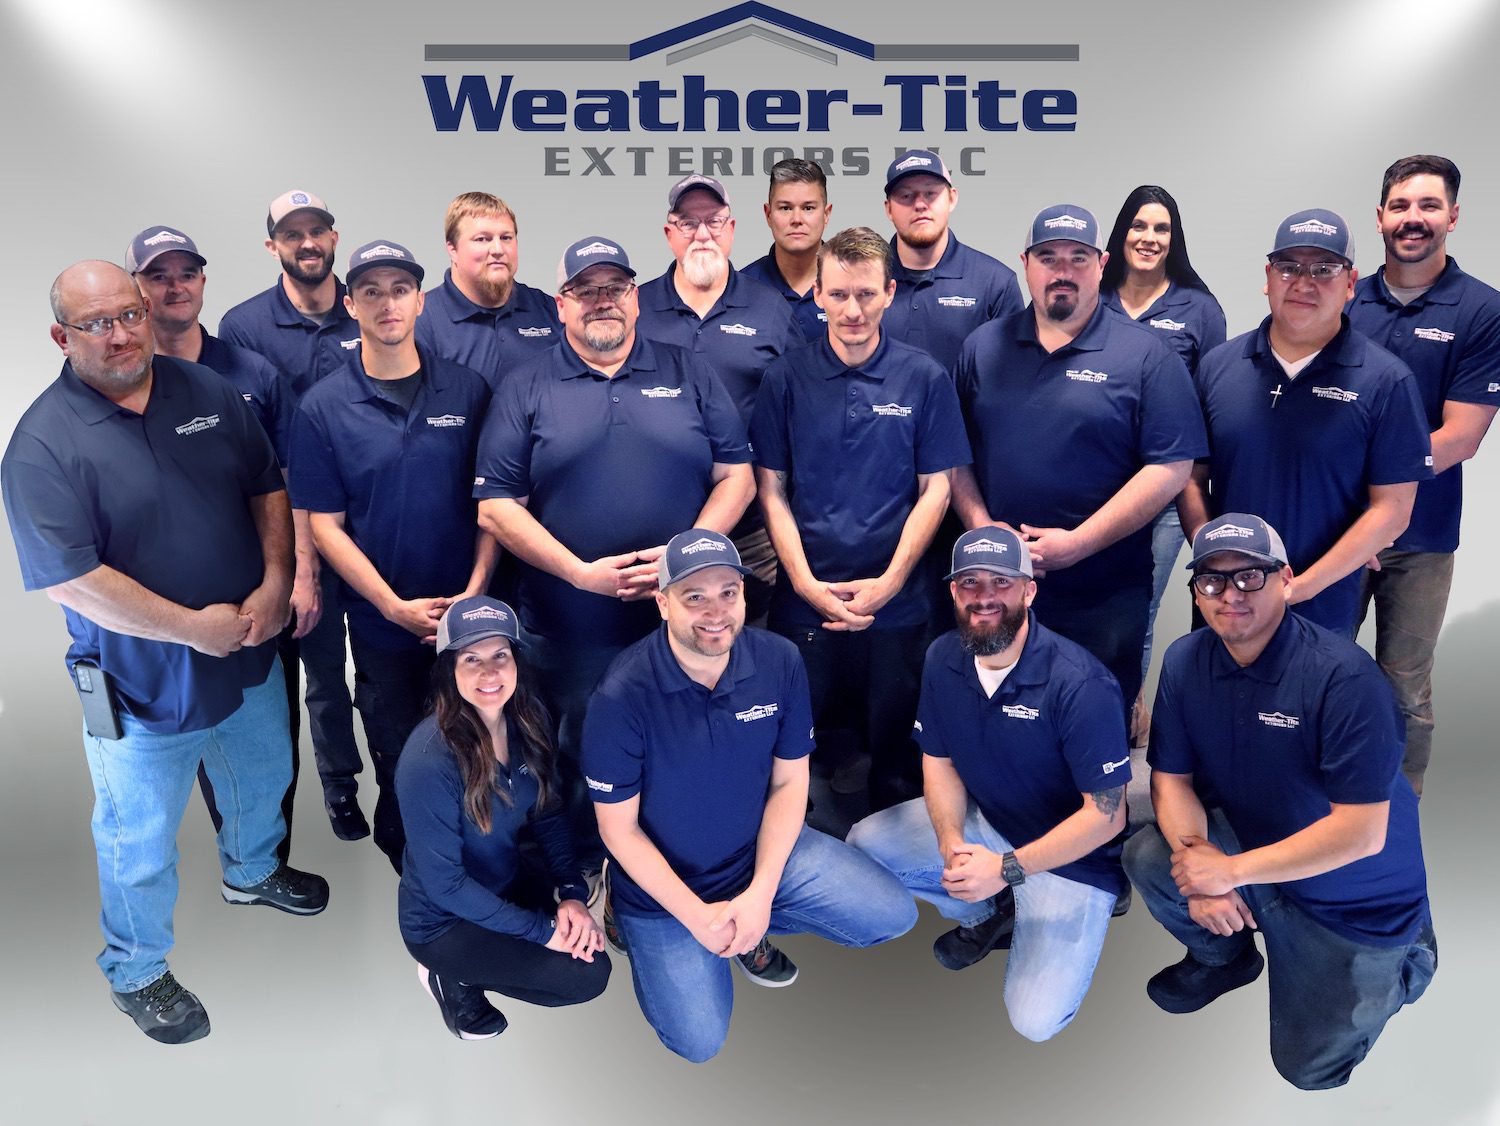 group of people all wearing weather tite shirts and hats posing in front of the weather tite logo with a silver background